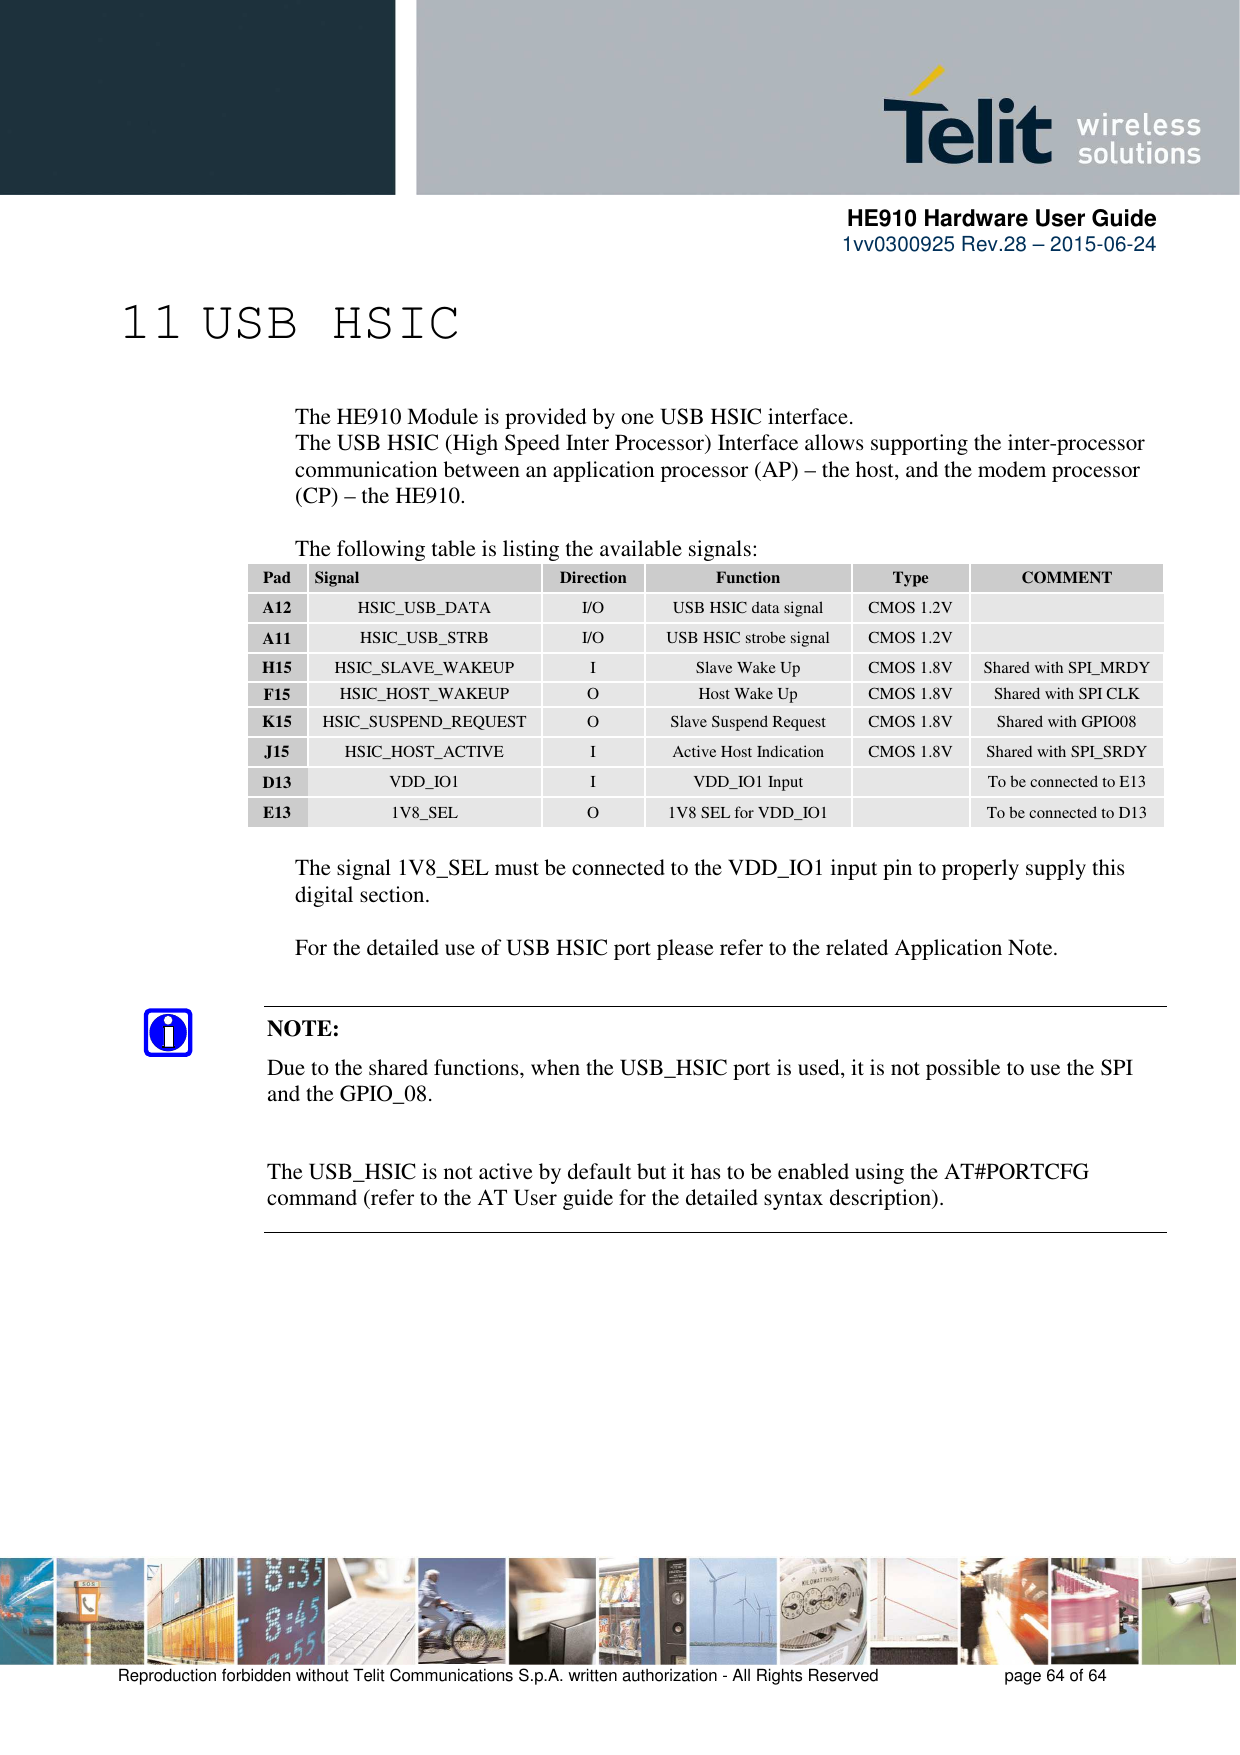      HE910 Hardware User Guide 1vv0300925 Rev.28 – 2015-06-24    Reproduction forbidden without Telit Communications S.p.A. written authorization - All Rights Reserved    page 64 of 64  11 USB HSIC     The HE910 Module is provided by one USB HSIC interface.       The USB HSIC (High Speed Inter Processor) Interface allows supporting the inter-processor  communication between an application processor (AP) – the host, and the modem processor  (CP) – the HE910.      The following table is listing the available signals: Pad  Signal  Direction  Function  Type  COMMENT A12  HSIC_USB_DATA  I/O  USB HSIC data signal  CMOS 1.2V   A11  HSIC_USB_STRB  I/O  USB HSIC strobe signal  CMOS 1.2V   H15  HSIC_SLAVE_WAKEUP  I  Slave Wake Up  CMOS 1.8V  Shared with SPI_MRDY F15  HSIC_HOST_WAKEUP  O  Host Wake Up  CMOS 1.8V  Shared with SPI CLK K15  HSIC_SUSPEND_REQUEST  O  Slave Suspend Request  CMOS 1.8V  Shared with GPIO08  J15  HSIC_HOST_ACTIVE  I  Active Host Indication  CMOS 1.8V  Shared with SPI_SRDY D13  VDD_IO1  I  VDD_IO1 Input    To be connected to E13 E13  1V8_SEL  O  1V8 SEL for VDD_IO1    To be connected to D13    The signal 1V8_SEL must be connected to the VDD_IO1 input pin to properly supply this   digital section.  For the detailed use of USB HSIC port please refer to the related Application Note.   NOTE:  Due to the shared functions, when the USB_HSIC port is used, it is not possible to use the SPI and the GPIO_08.  The USB_HSIC is not active by default but it has to be enabled using the AT#PORTCFG command (refer to the AT User guide for the detailed syntax description). 